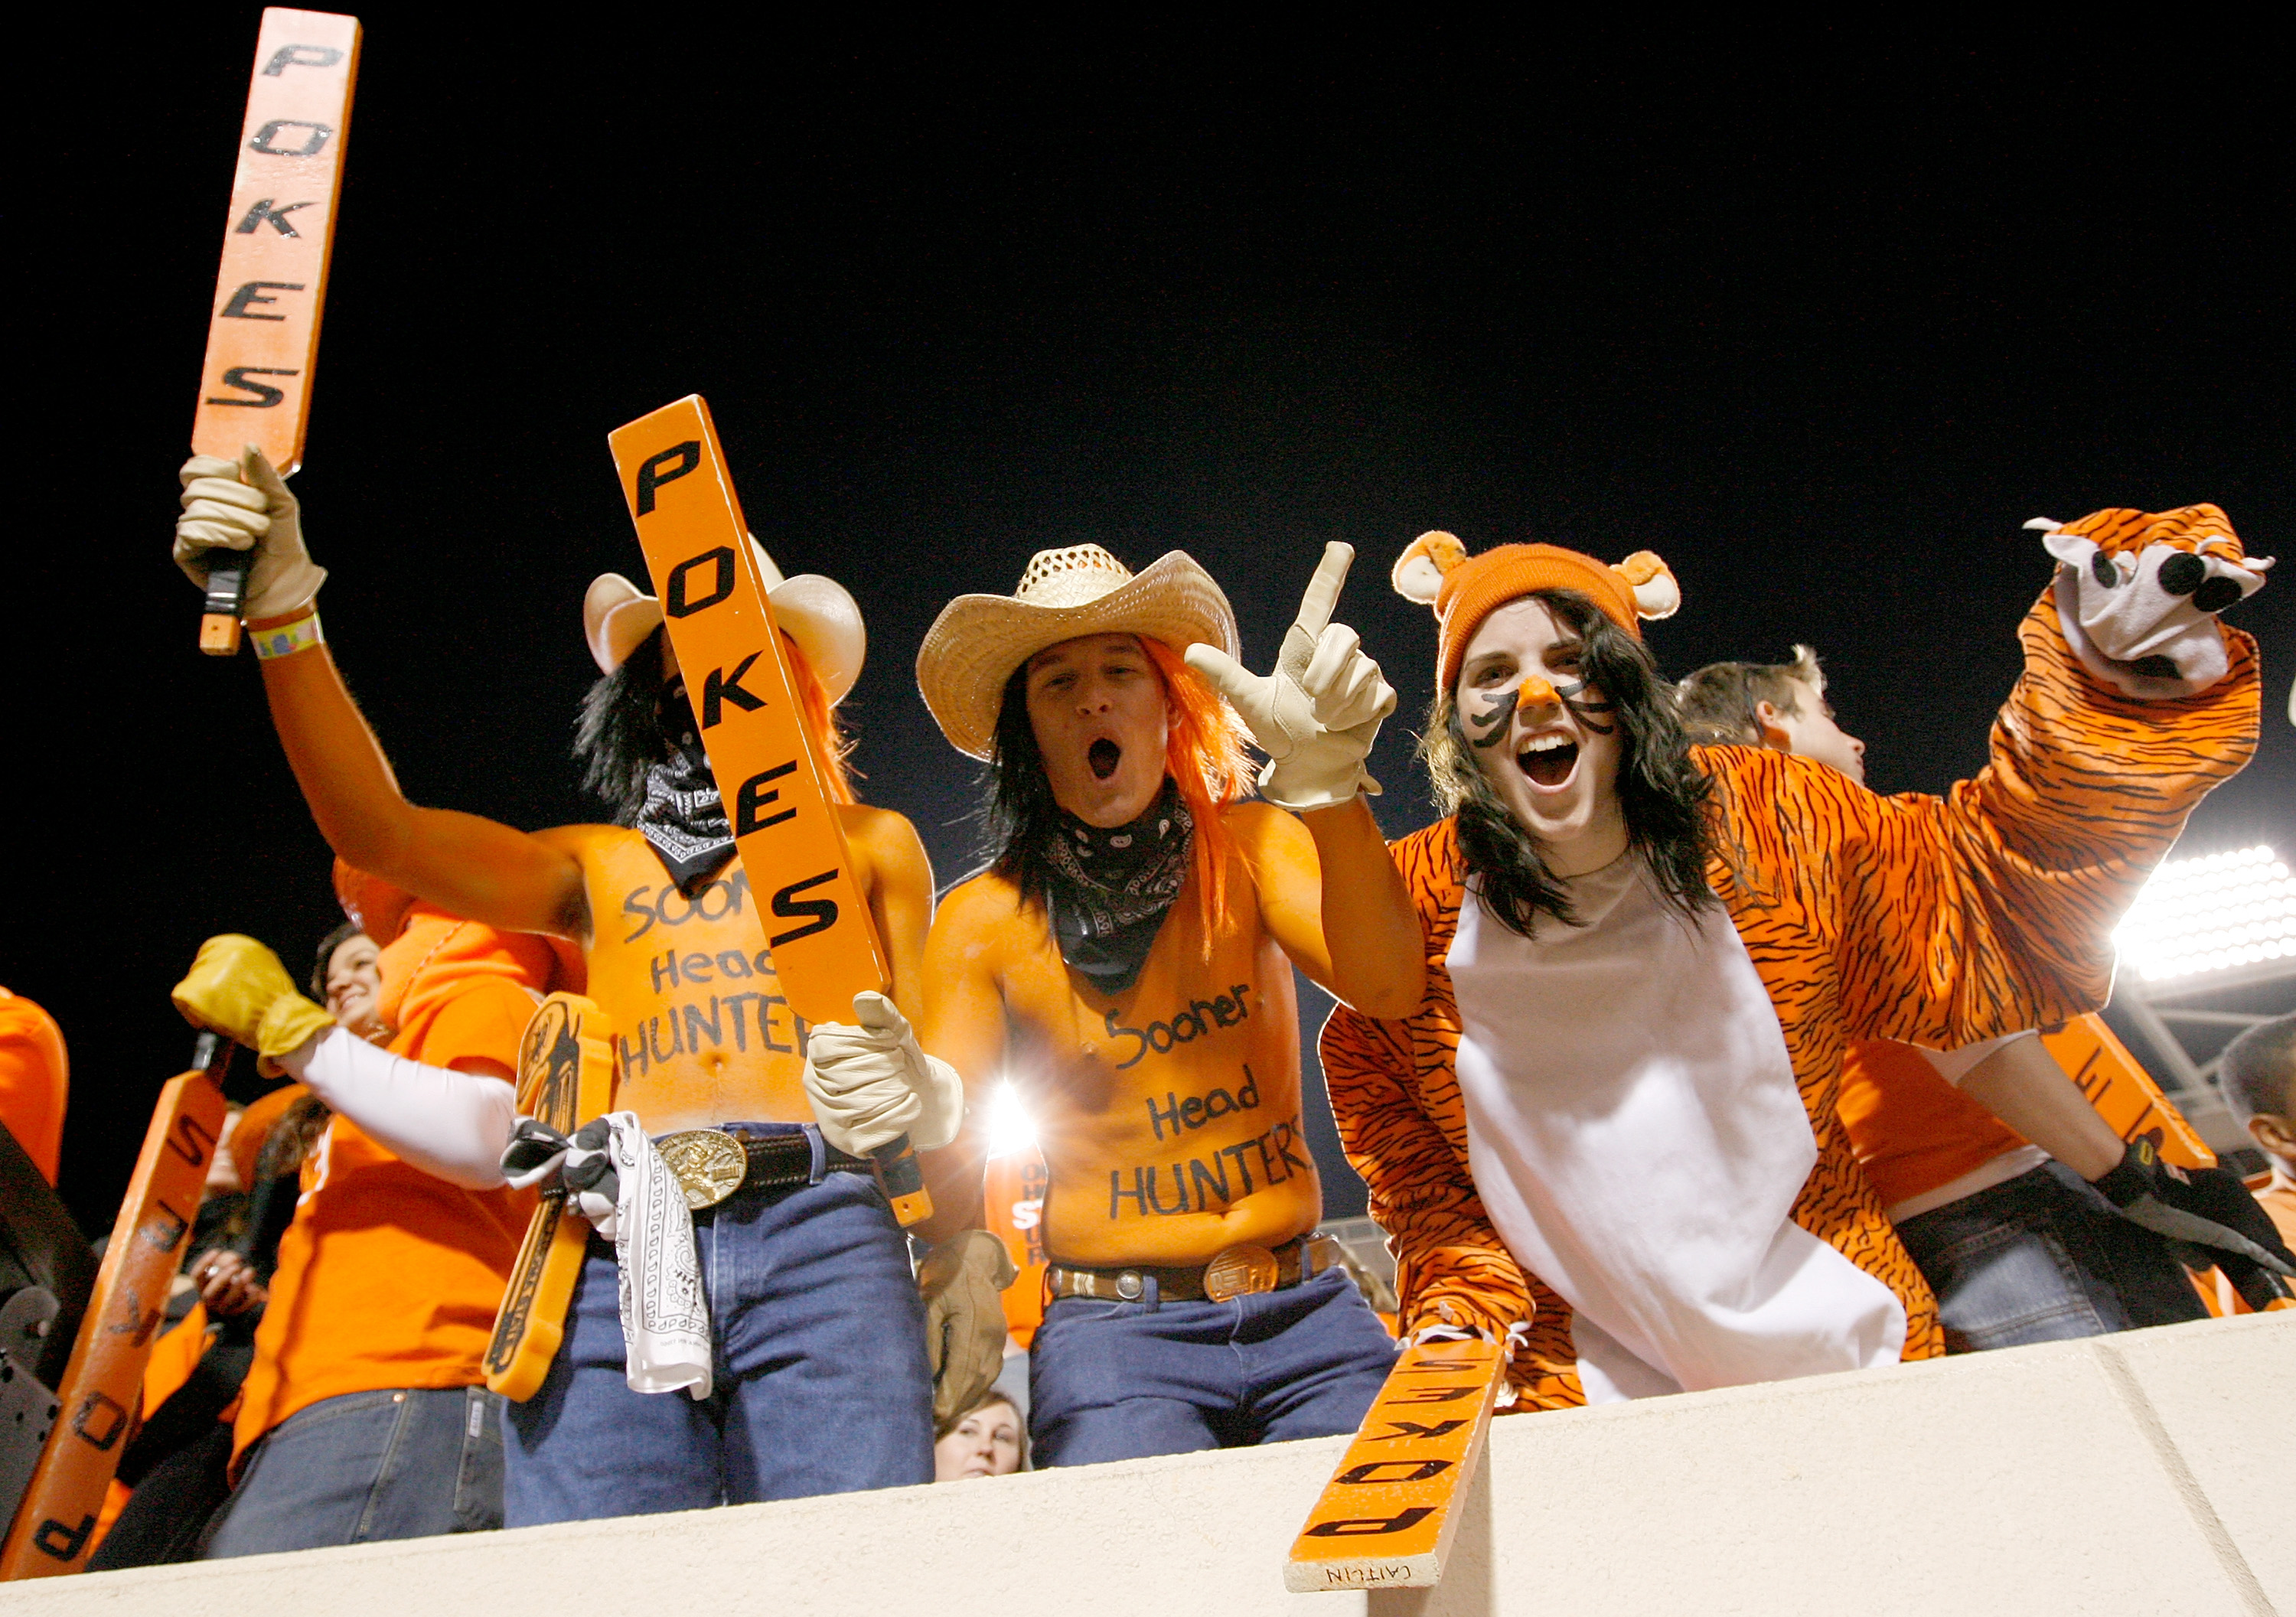 STILLWATER, OK - NOVEMBER 27:  Oklahoma State Cowboy fans cheer on their team as the Cowboys prepare to take on the Oklahoma Soones at Boone Pickens Stadium on November 27, 2010 in Stillwater, Oklahoma.  (Photo by Tom Pennington/Getty Images)